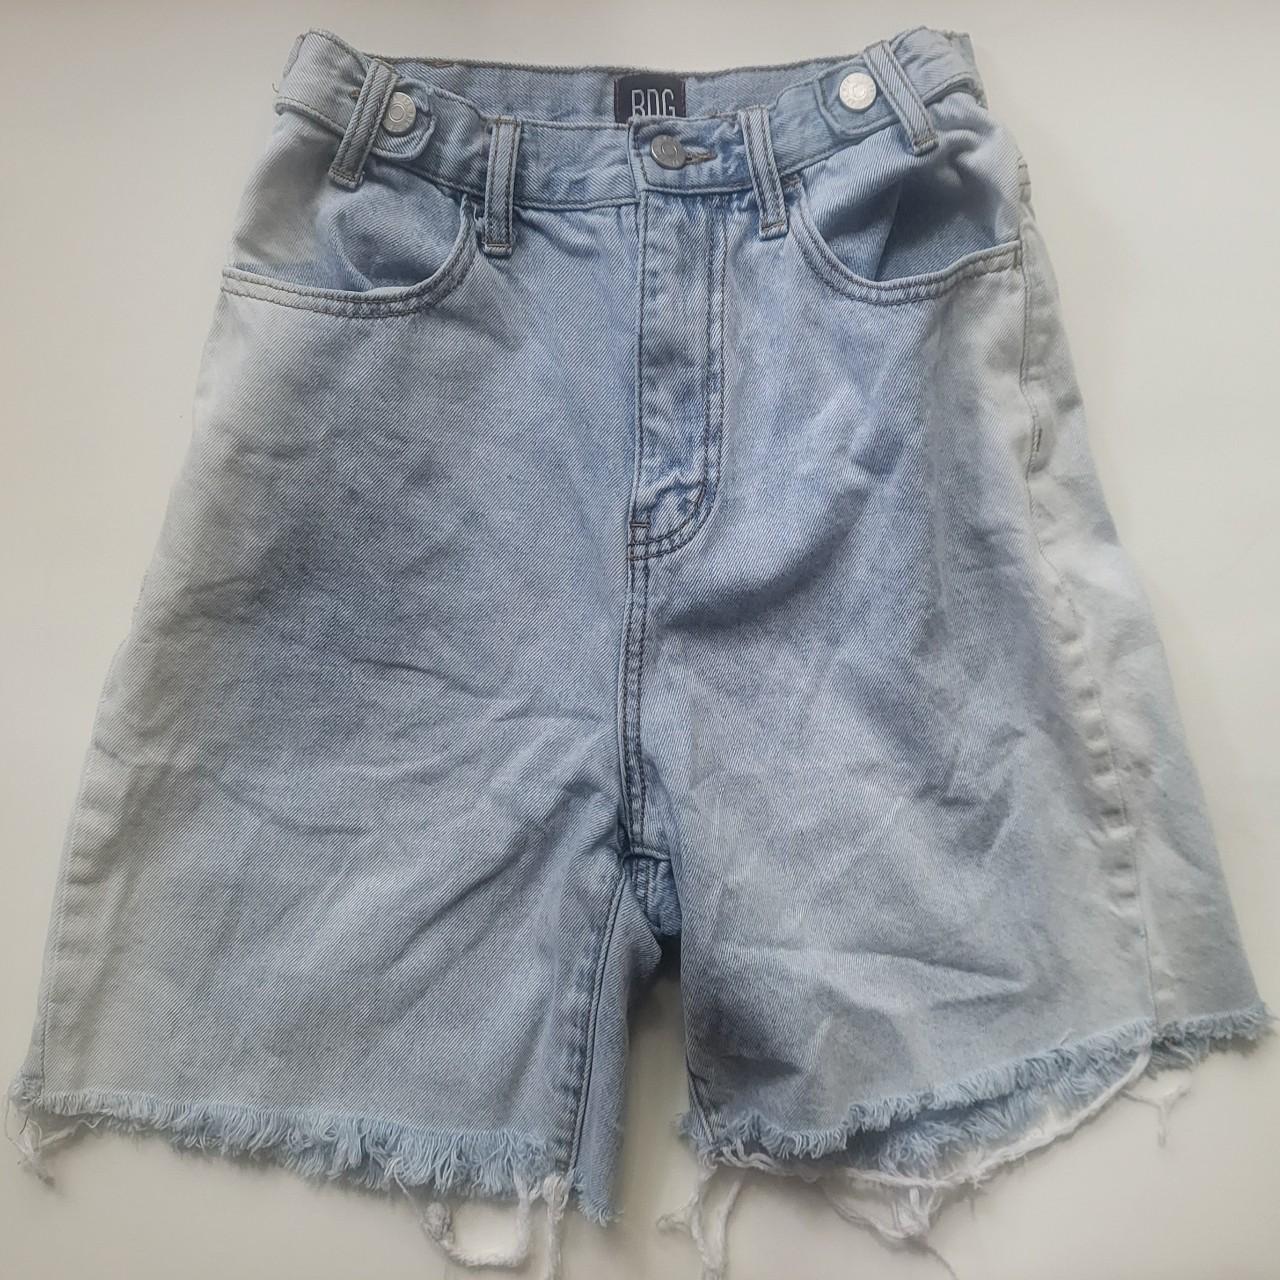 BDG - JORTS - URBAN OUTFITTERS - SIZE 27 - Depop